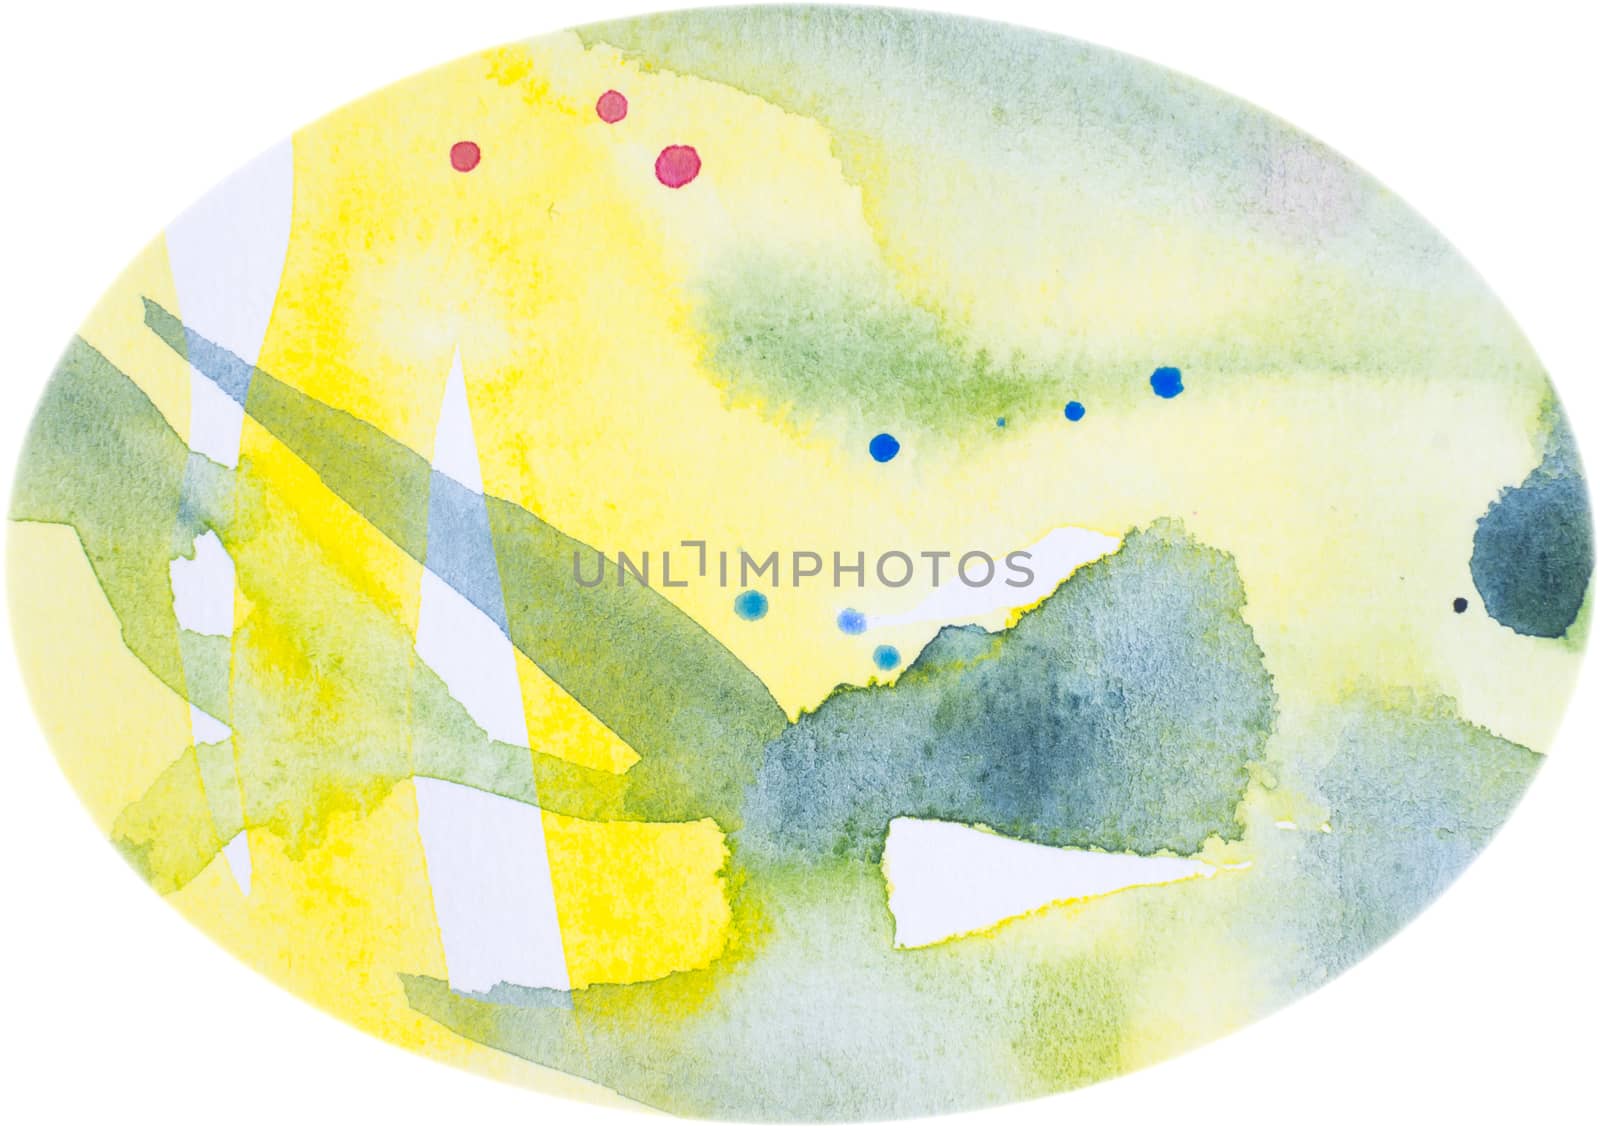 Watercolor egg-shaped background, Abstract textured watercolor background.